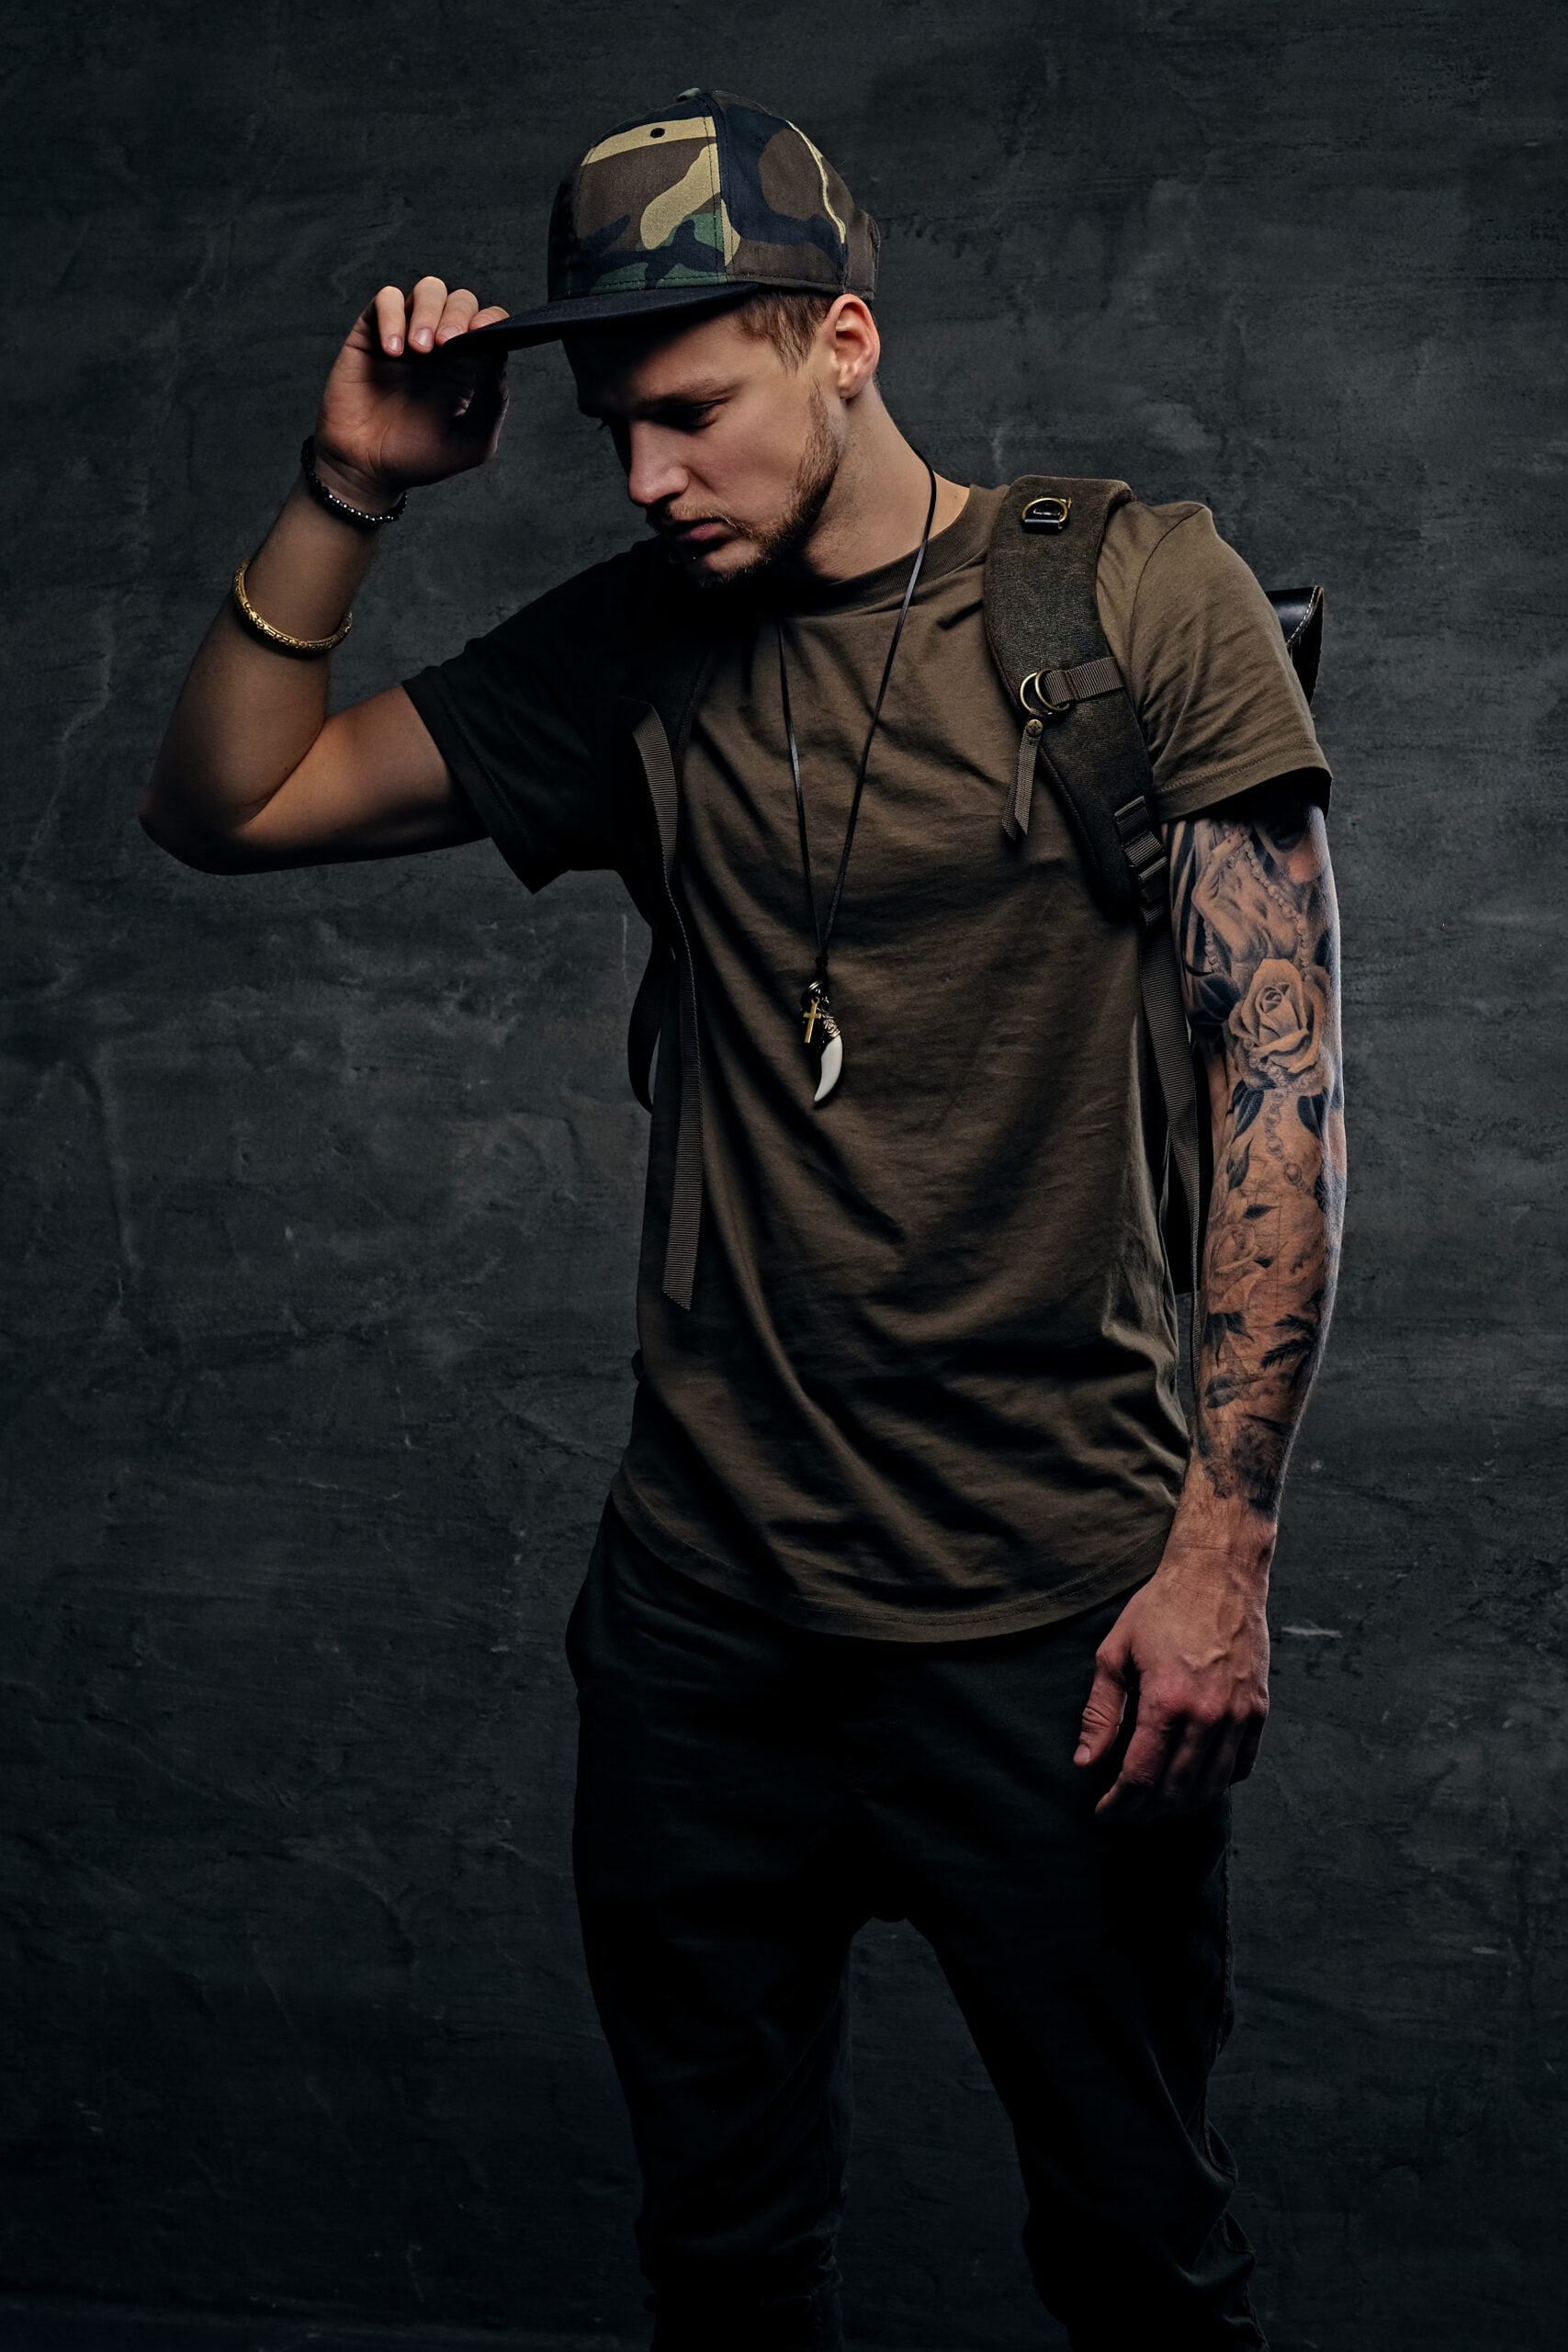 urban-style-backpacker-with-tattooed-arms-dressed-dark-green-t-shirt-camo-cap-scaled.jpg